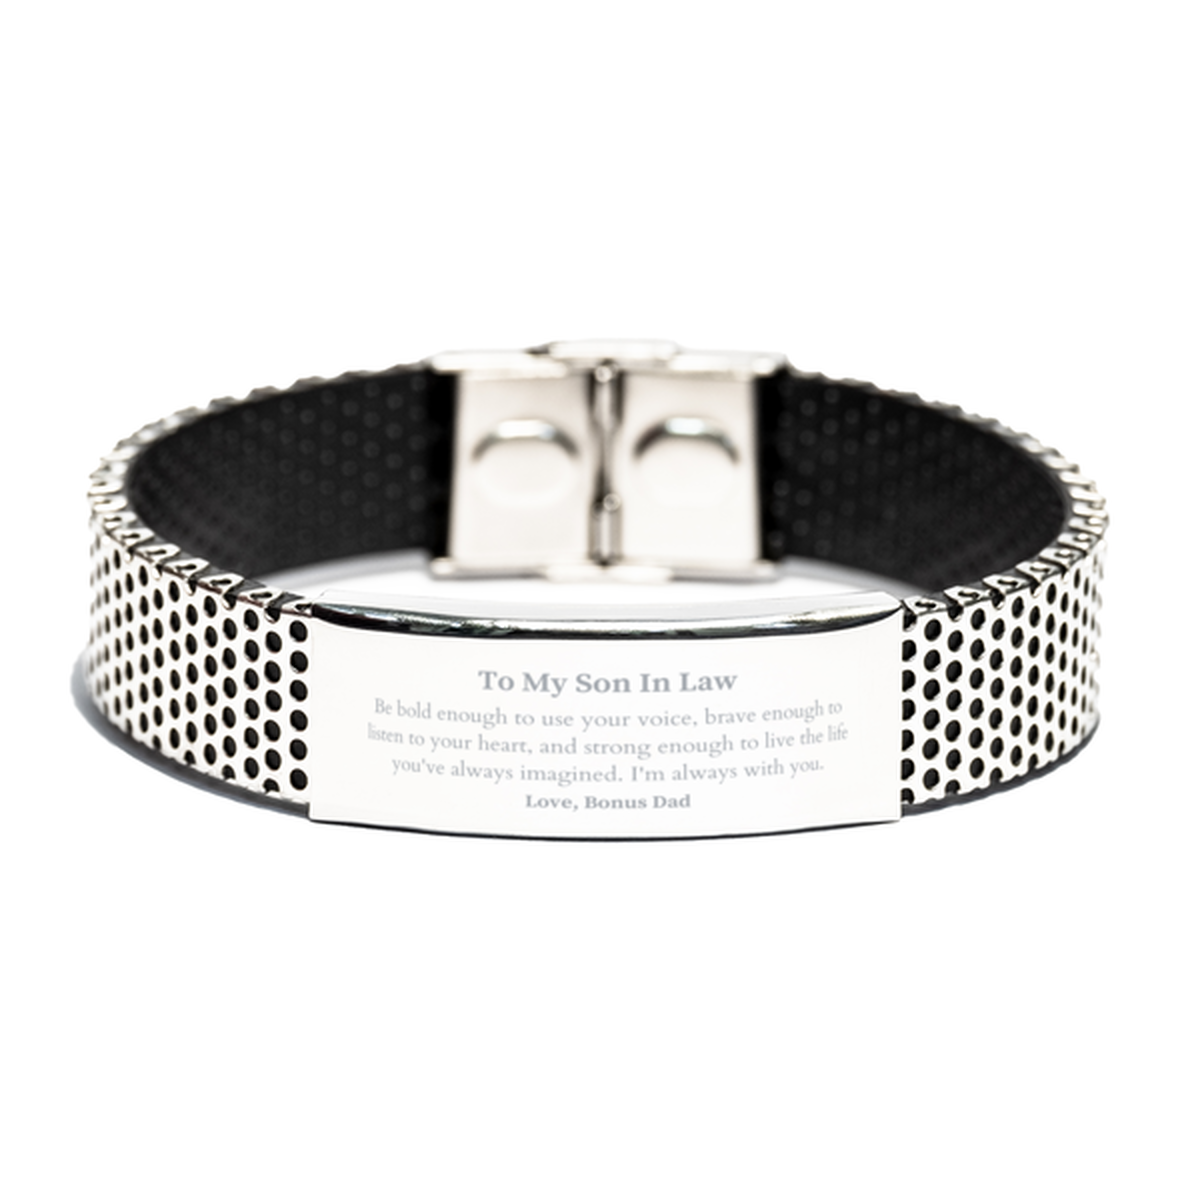 Keepsake Son In Law Stainless Steel Bracelet Gift Idea Graduation Christmas Birthday Son In Law from Bonus Dad, Son In Law Be bold enough to use your voice, brave enough to listen to your heart. Love, Bonus Dad